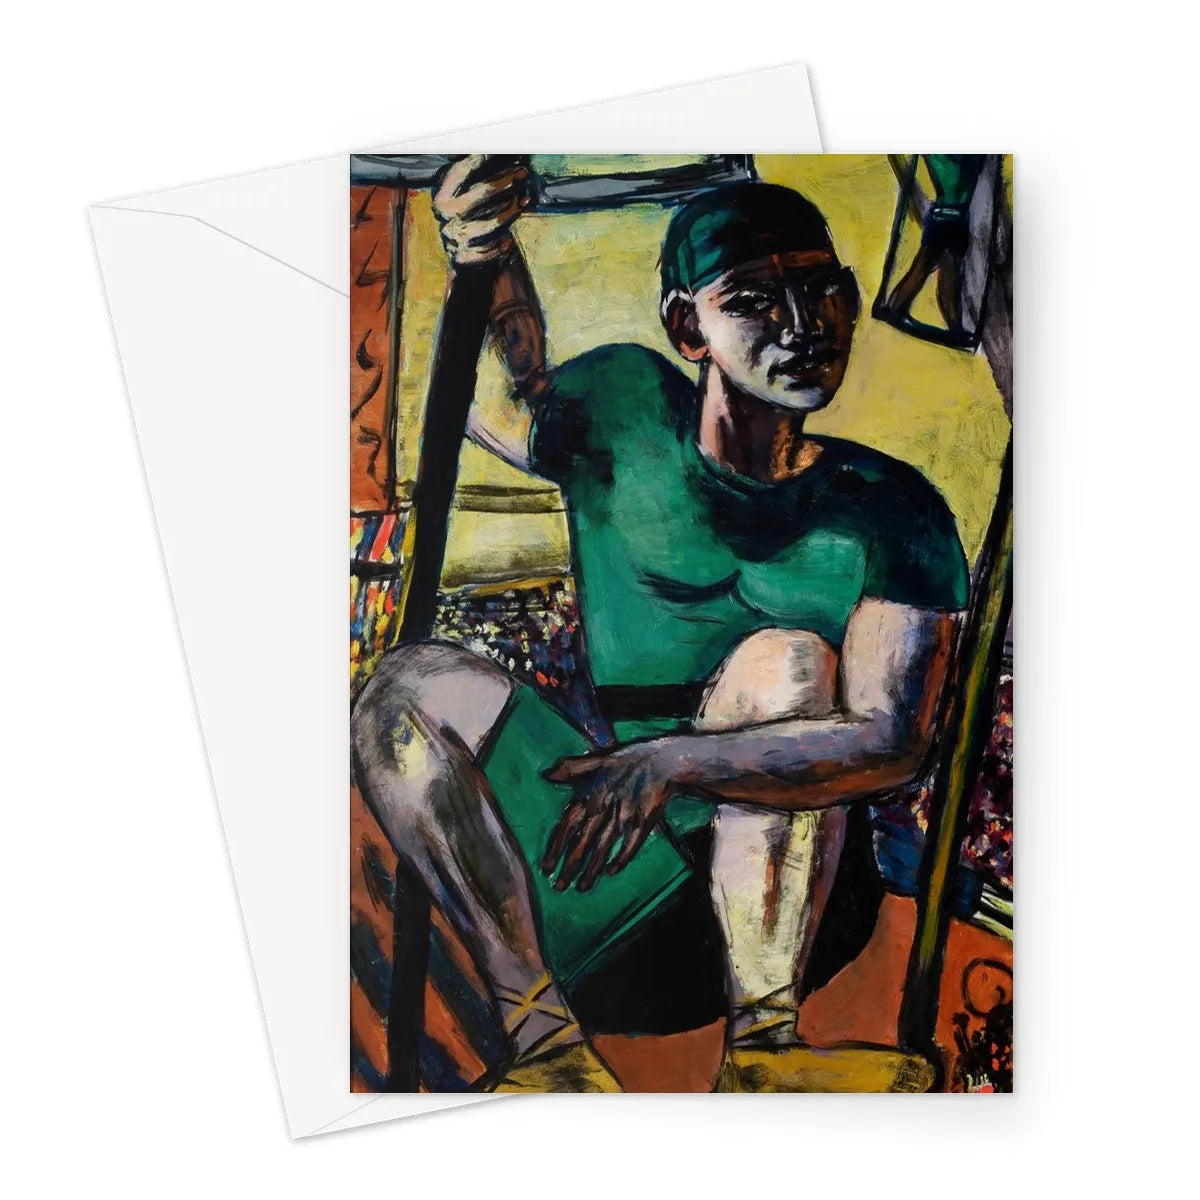 Acrobat On The Trapeze By Max Beckmann Greeting Card - A5 Portrait / 1 Card - Notebooks & Notepads - Aesthetic Art